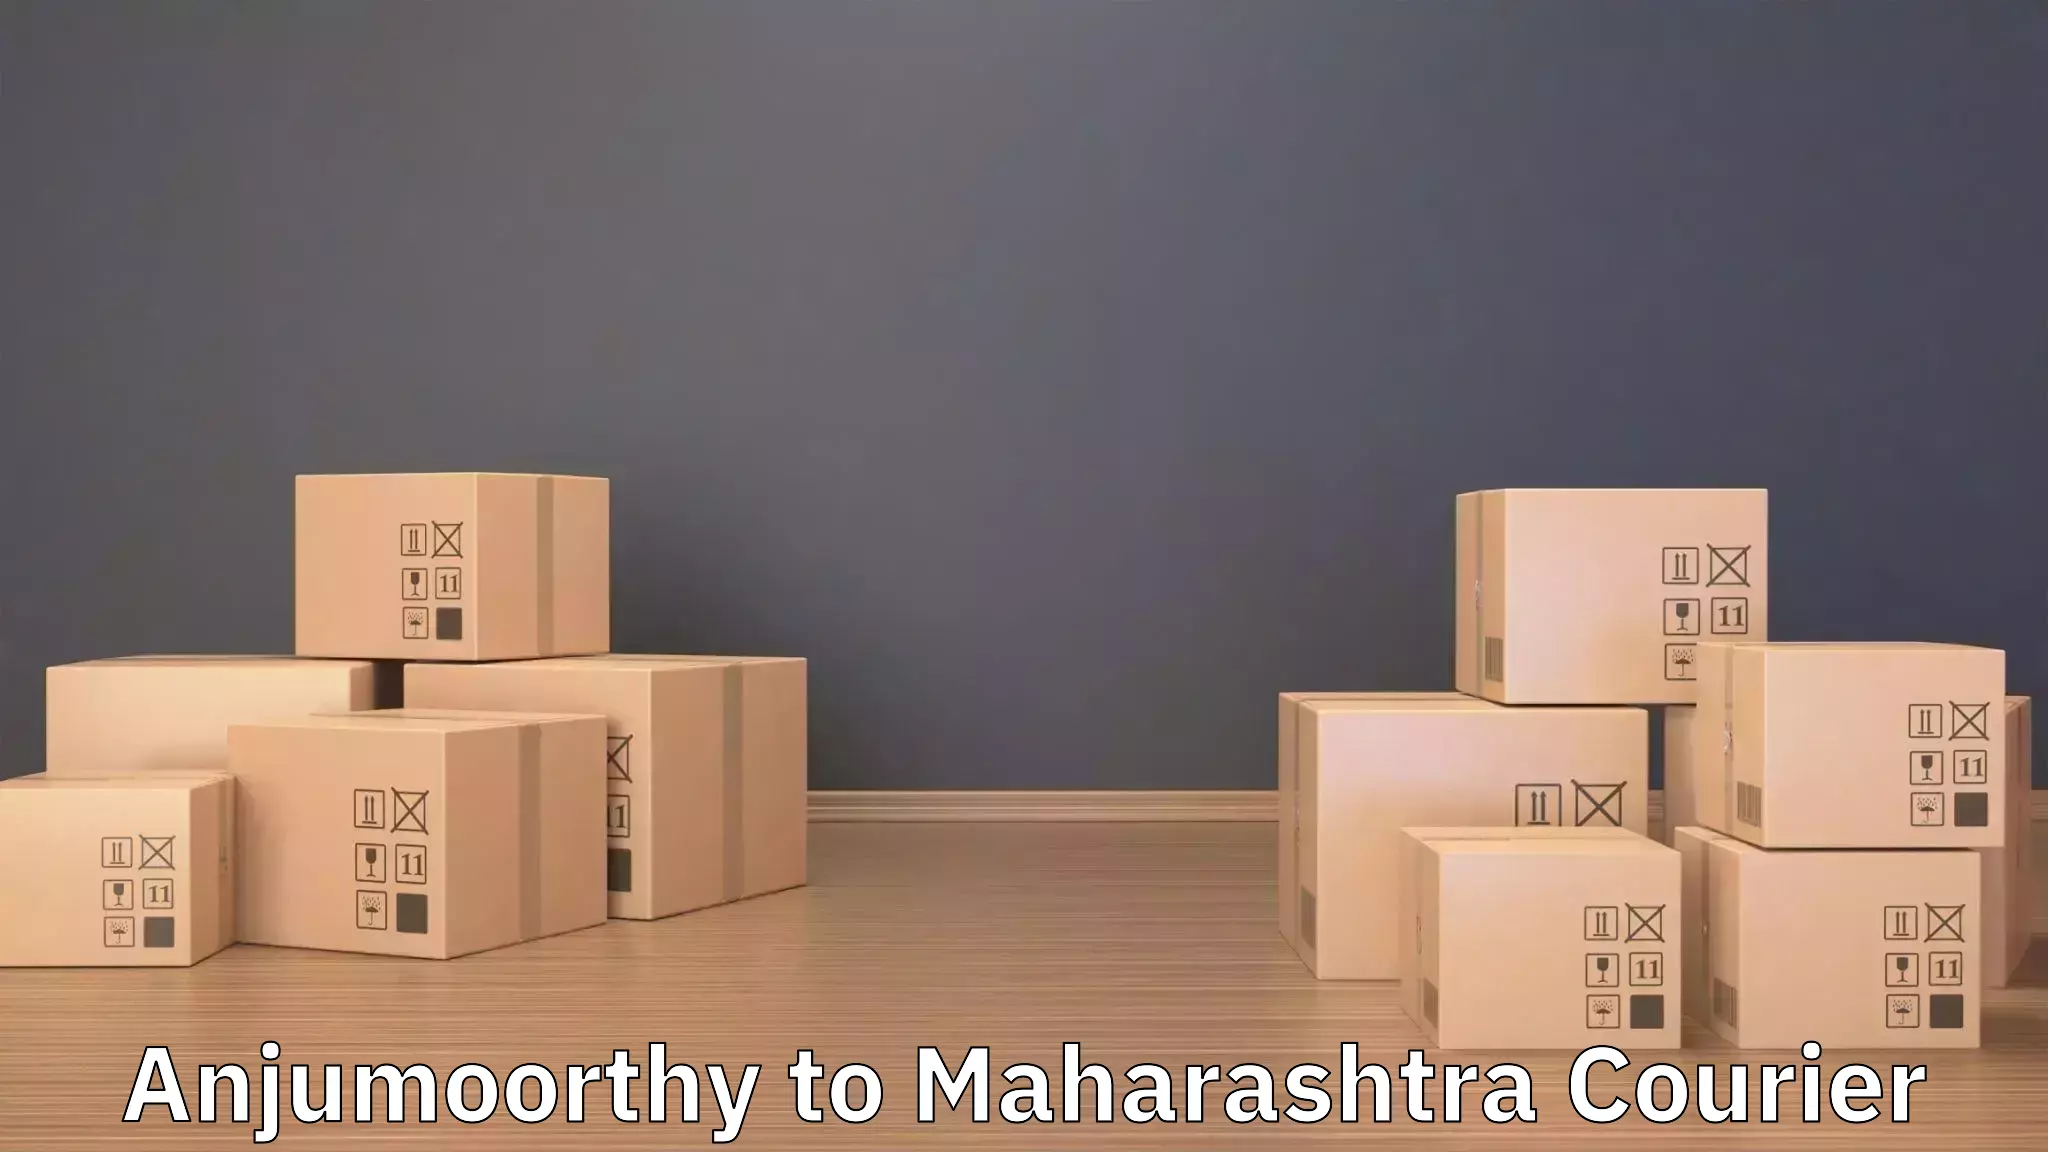 Quality relocation assistance in Anjumoorthy to Mahim